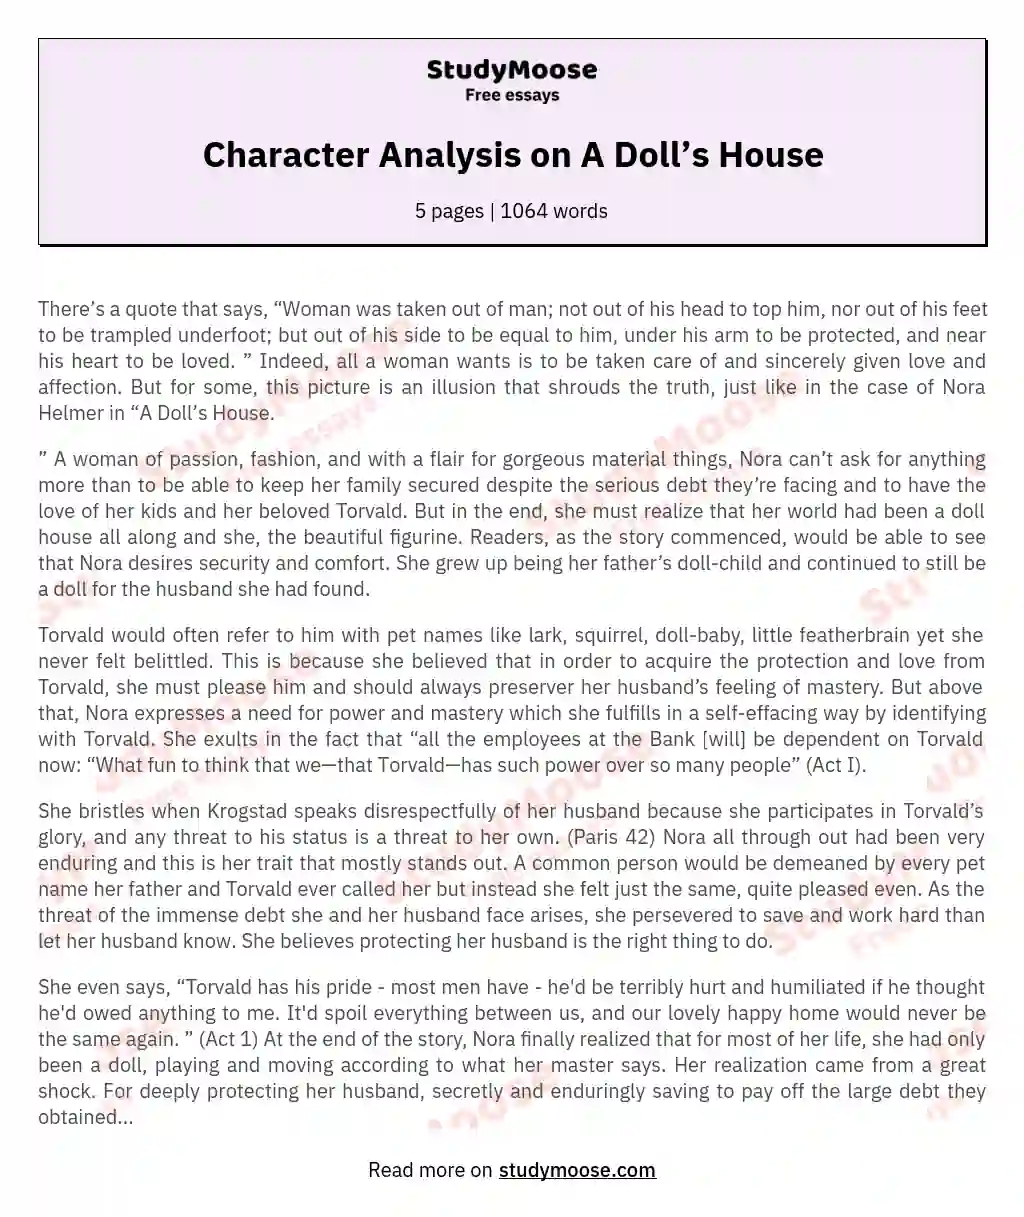 Character Analysis on A Doll’s House